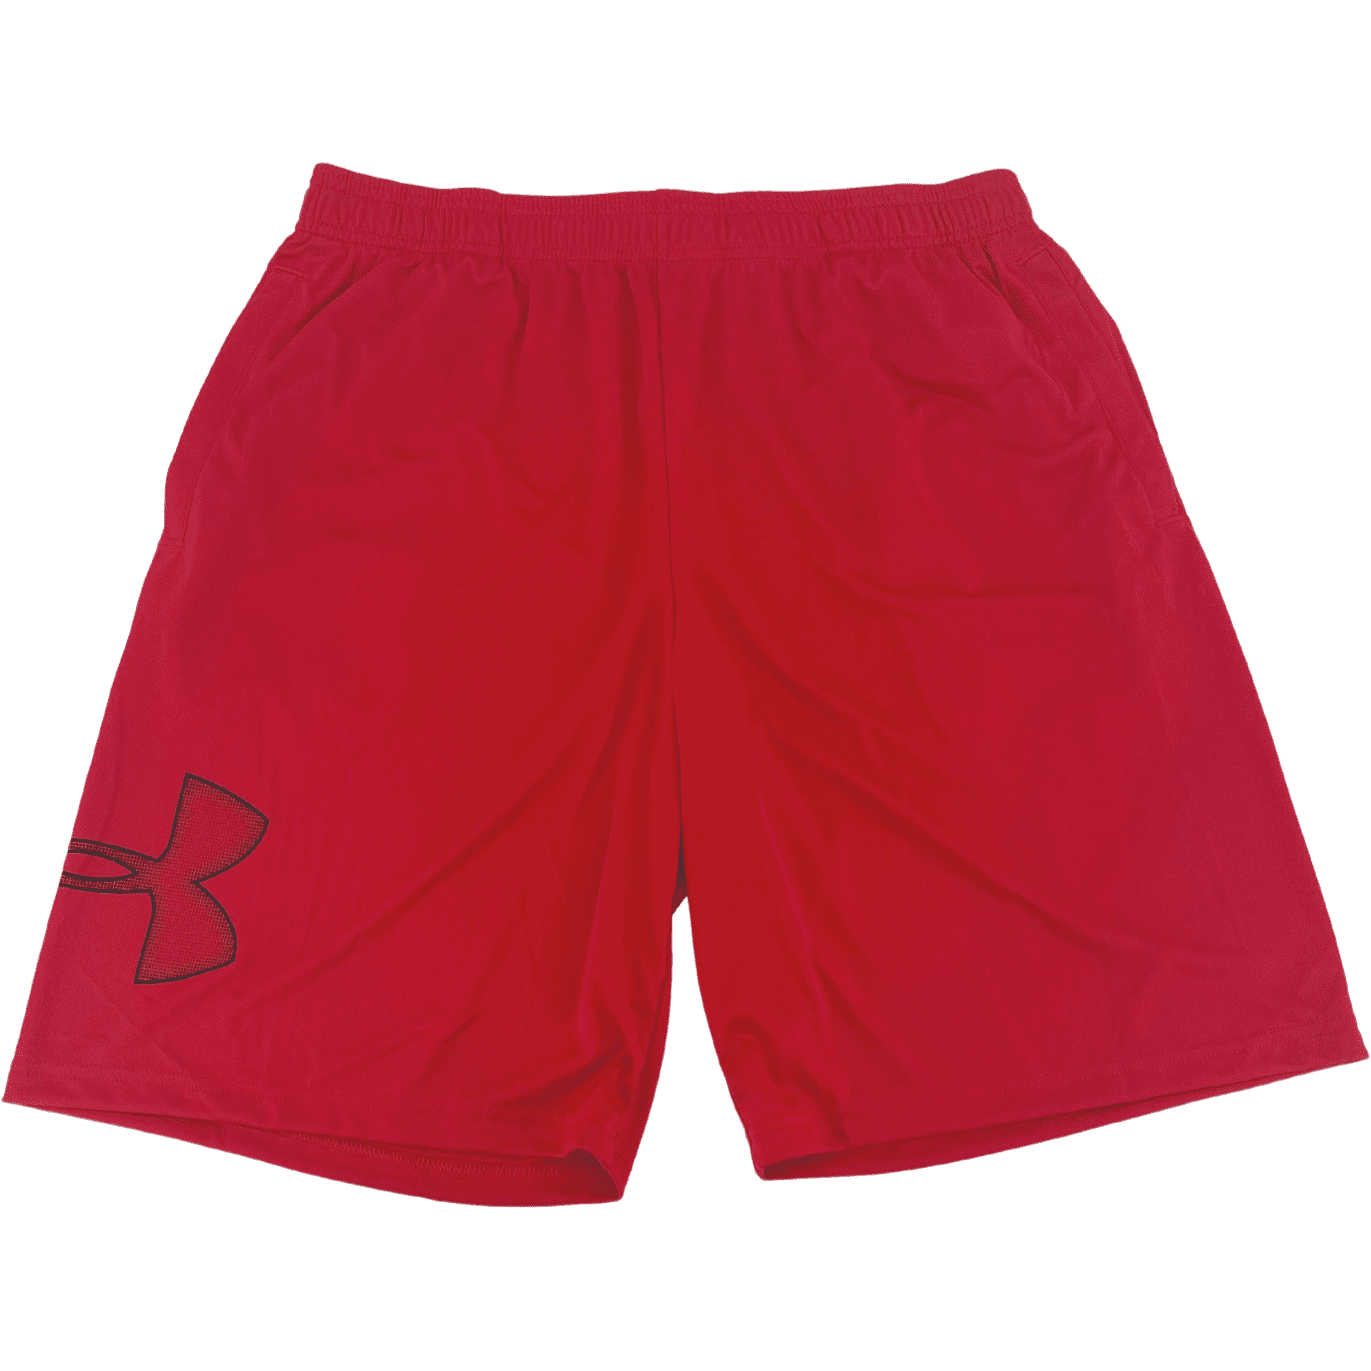 Under Armour Men's Athletic Shorts / Red / Size Large